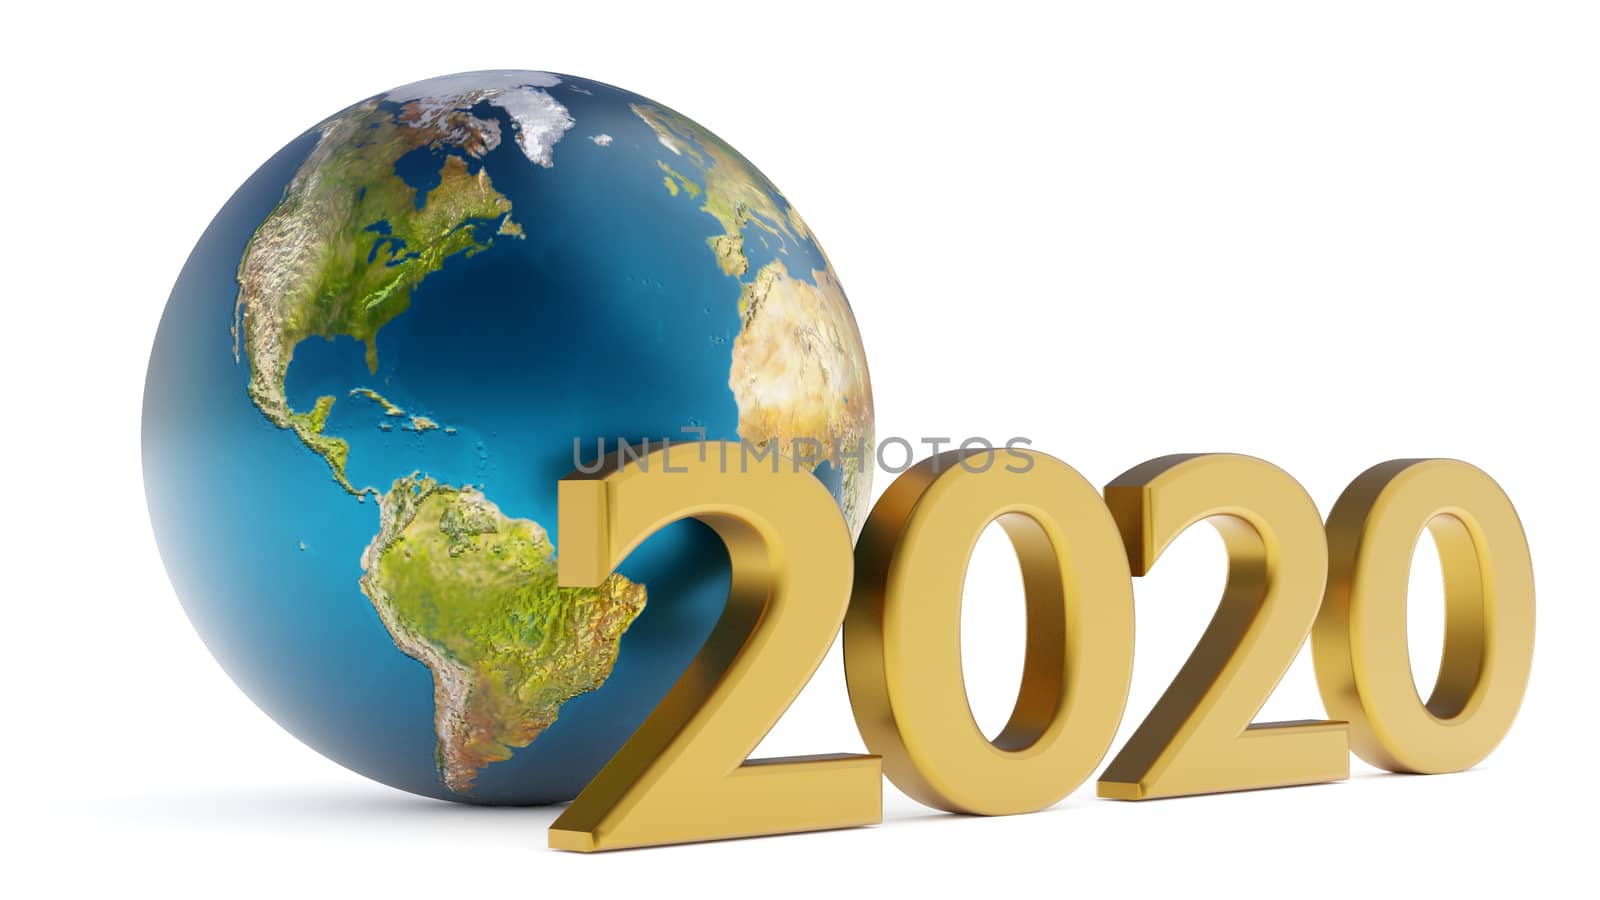 Yearr 2020 and globe america 3d illustration over white